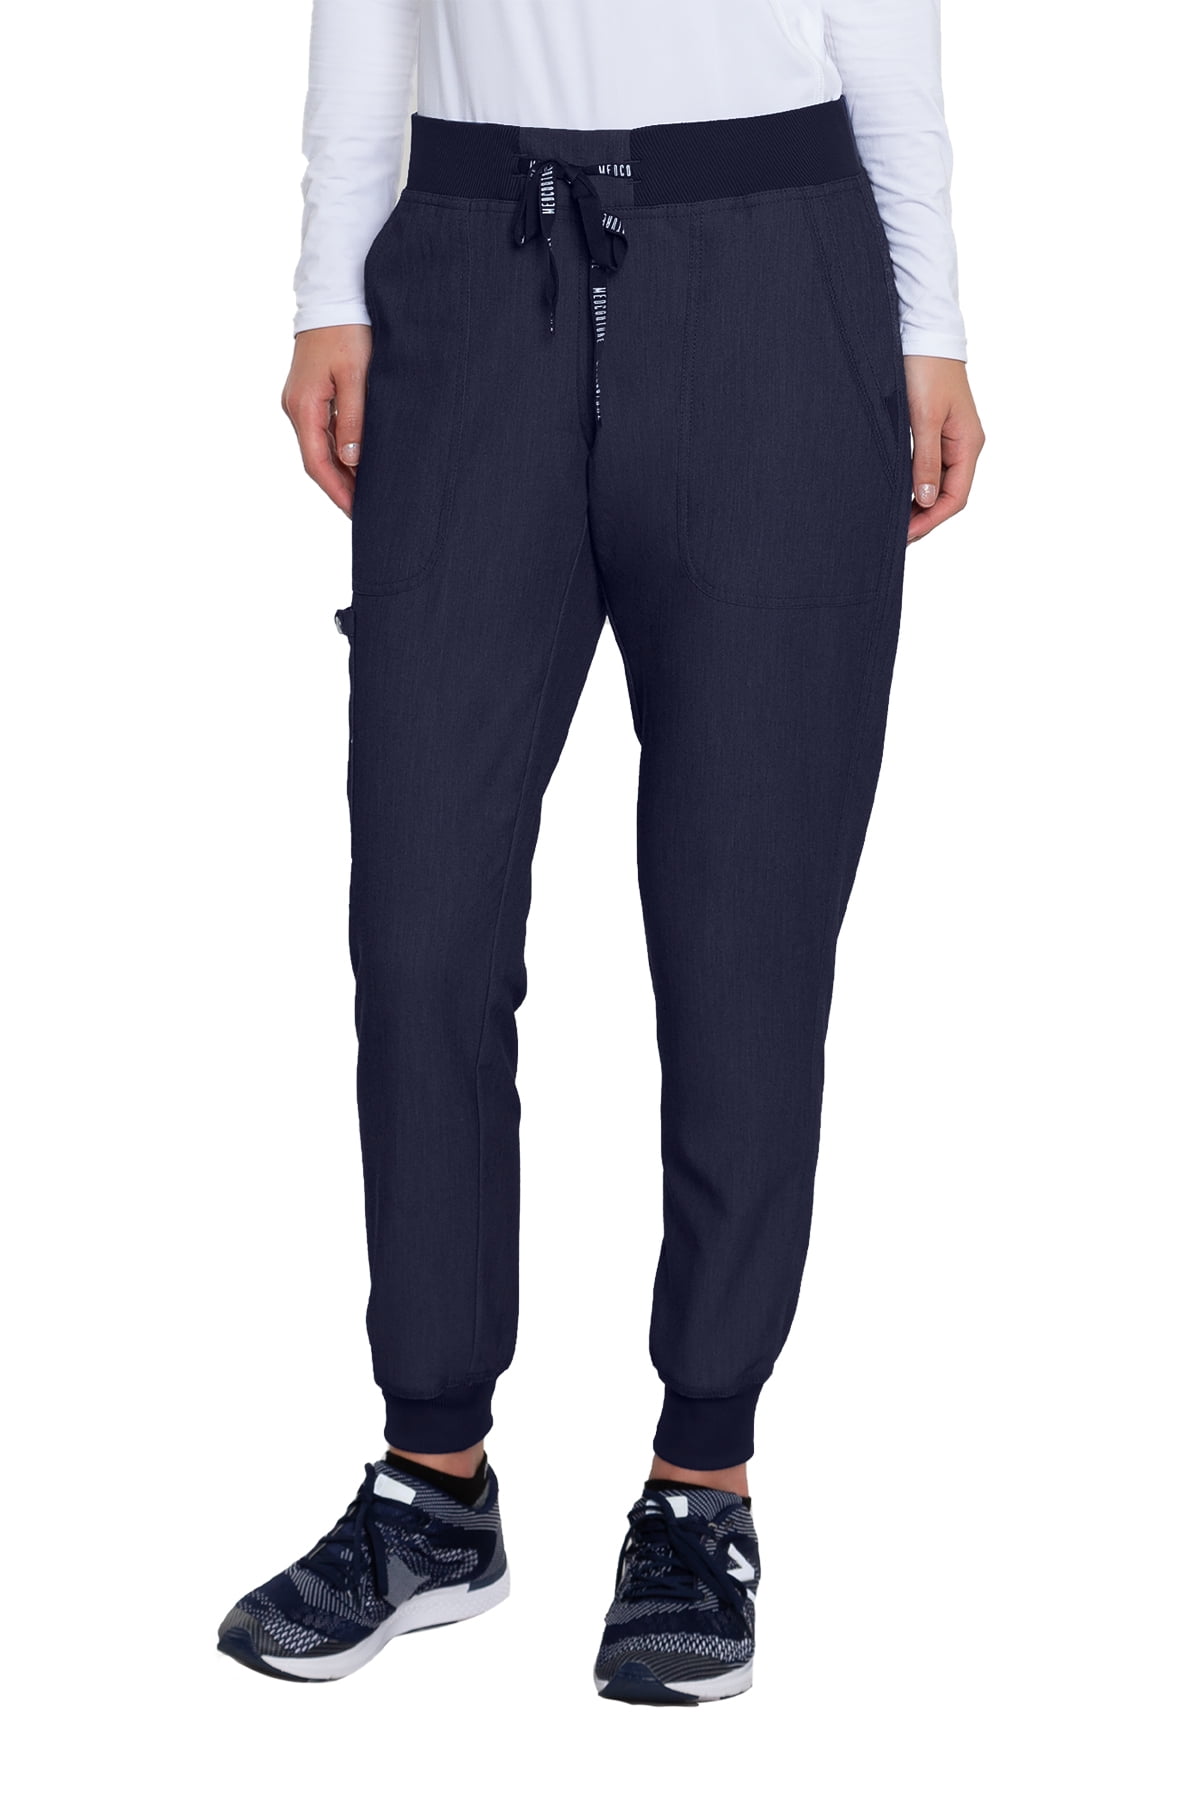 7710T TALL Med Couture Touch Performance Jogger Yoga Pant 